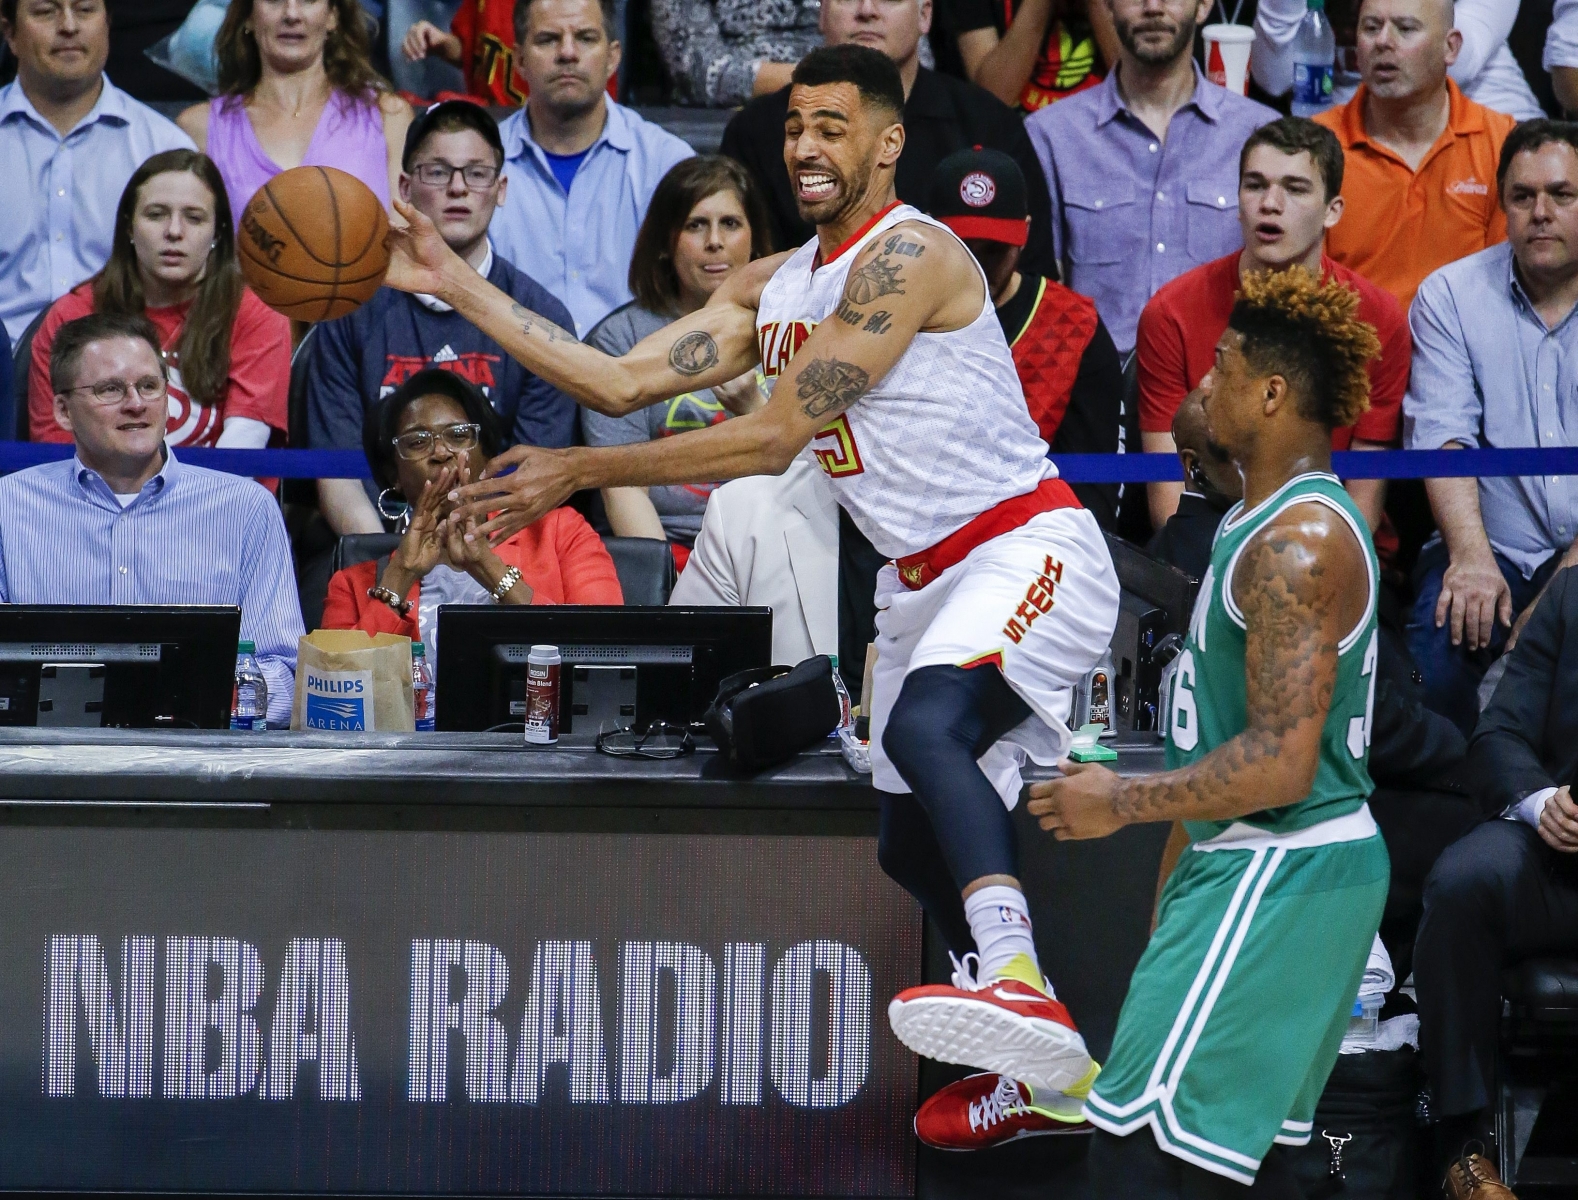 epa05278964 Atlanta Hawks forward Thabo Sefolosha (L) of Switzerland saves the ball from going out-of-bounds against Boston Celtics guard Marcus Smart (R) during the first half of game 5 of their NBA Eastern Conference first round playoff series at Philips Arena in Atlanta, Georgia, USA, 26 April 2016.  EPA/ERIK S. LESSER CORBIS OUT USA BASKETBALL NBA PLAYOFFS